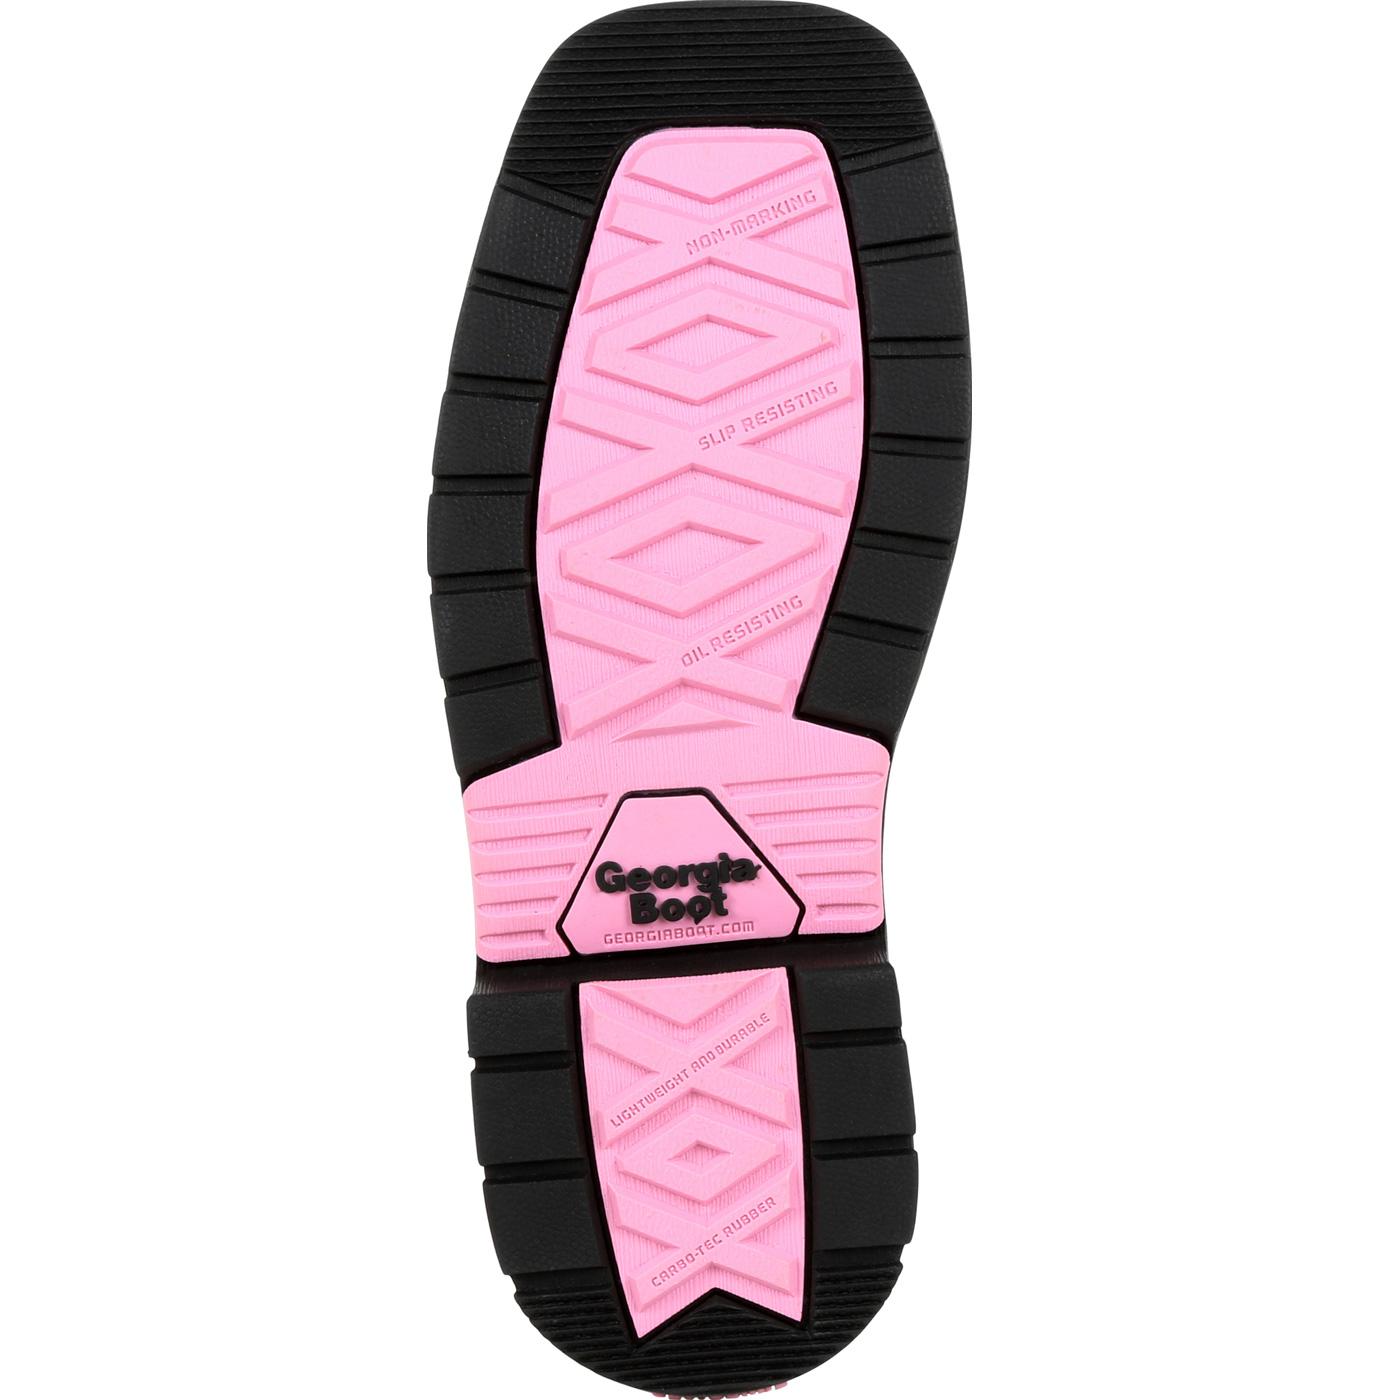 Georgia | Little Kid's Boot Carbo-Tec LT Pull On Boot | Brown / Pink - Outback Traders Australia